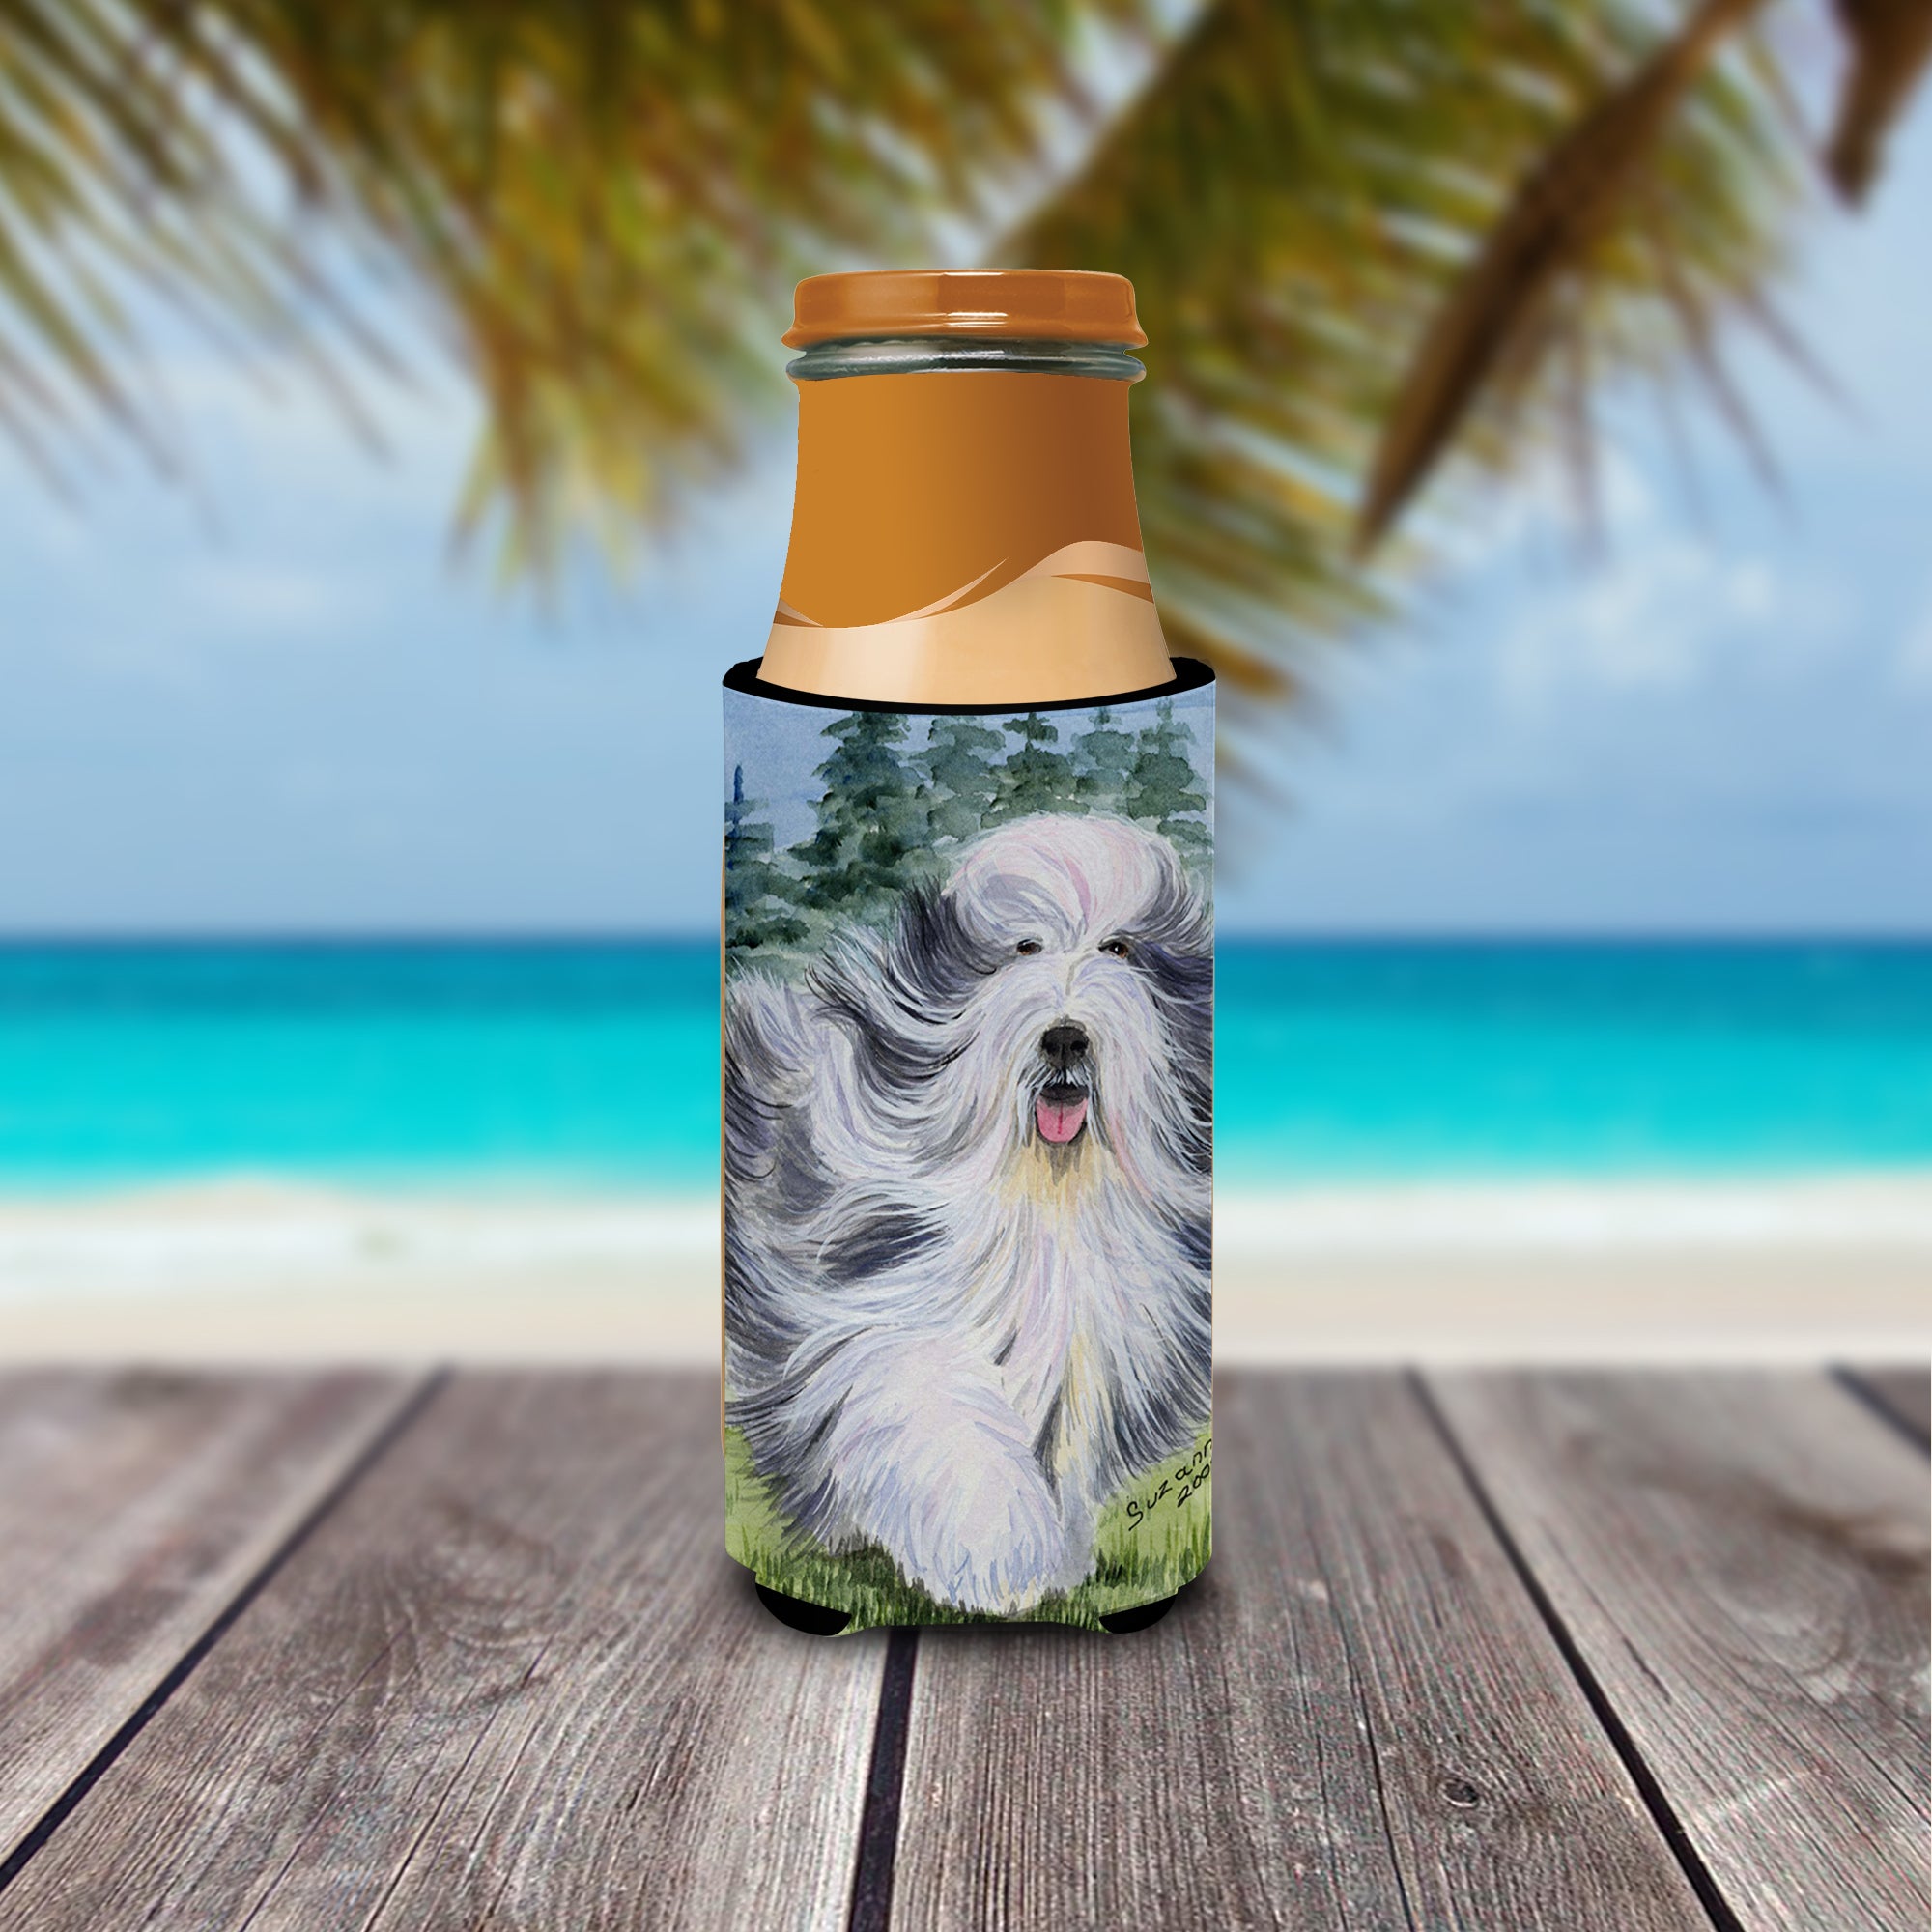 Bearded Collie Ultra Beverage Insulators for slim cans SS8037MUK